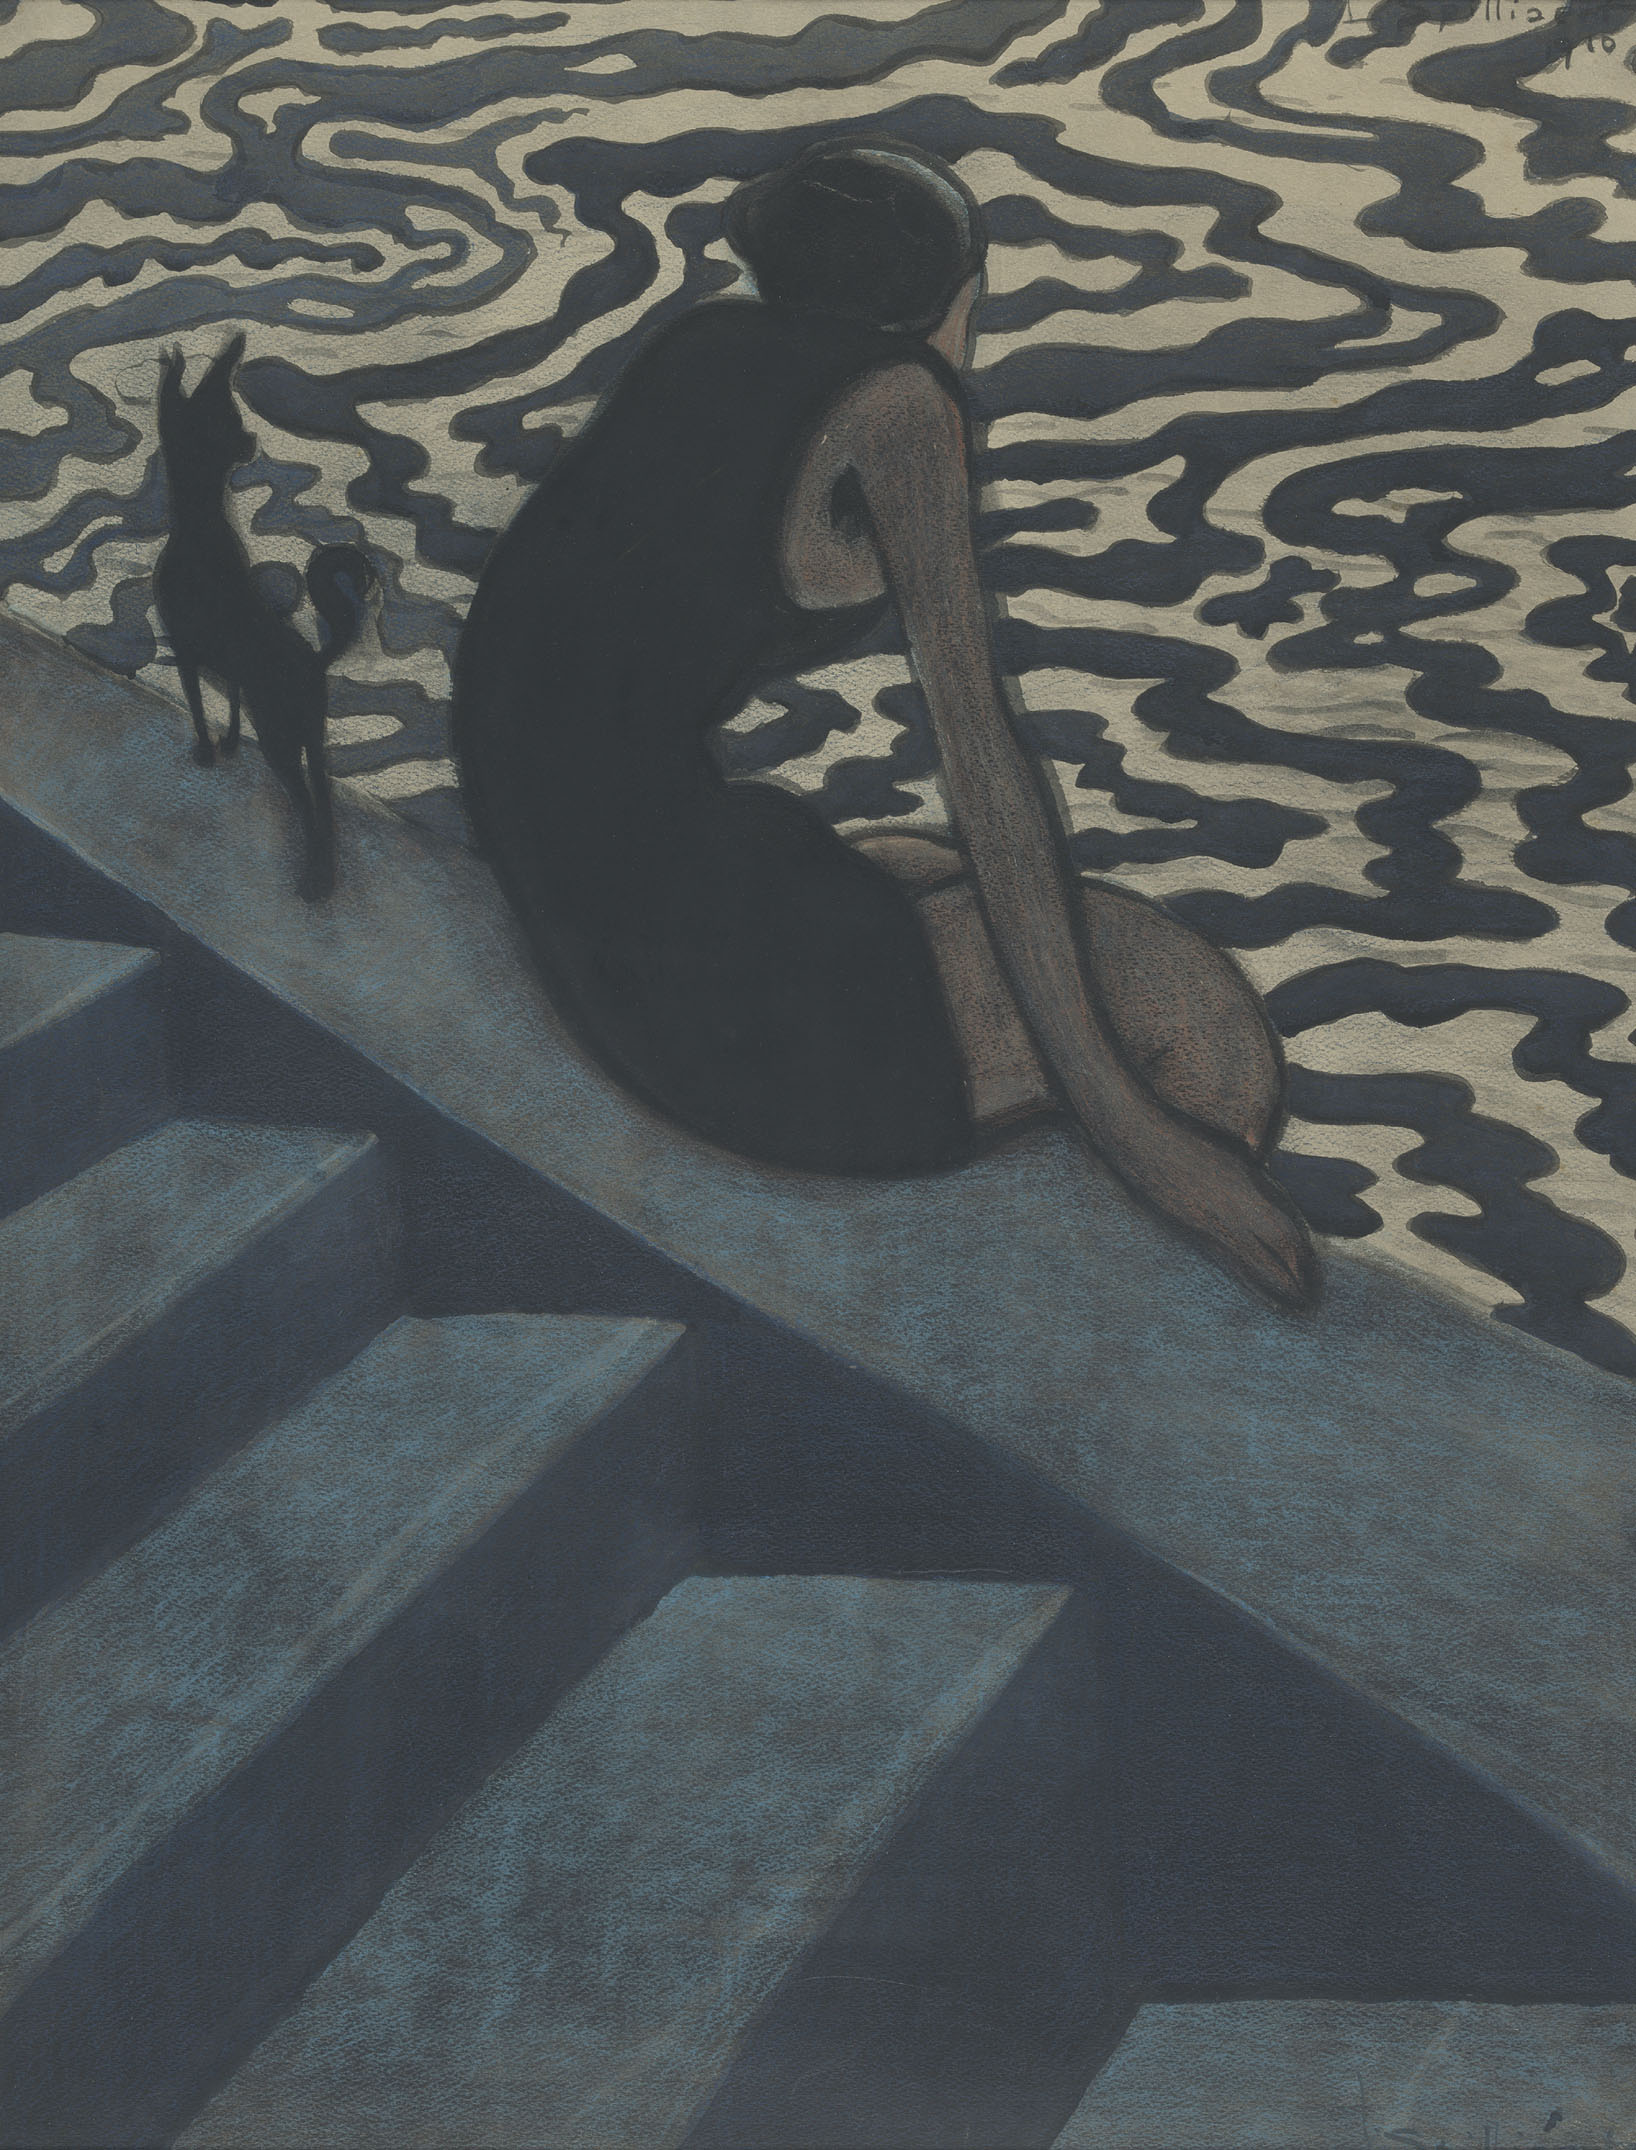 The Bather by Léon Spilliaert - 1910 - 64,9 x 50,4 cm The Royal Museums of Fine Arts of Belgium